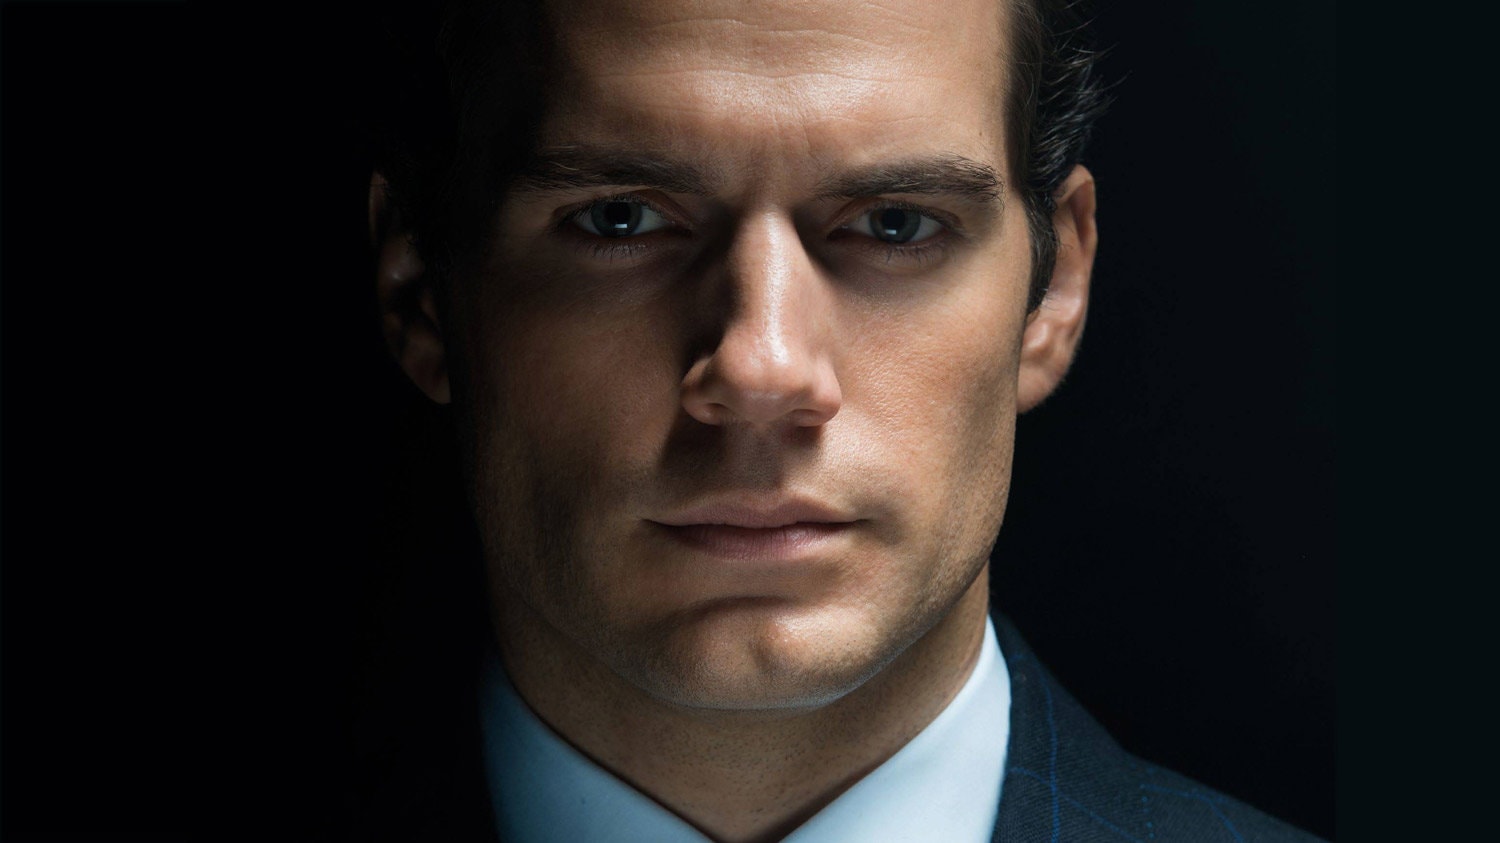 the-man-from-uncle-henry-cavill-james-bond